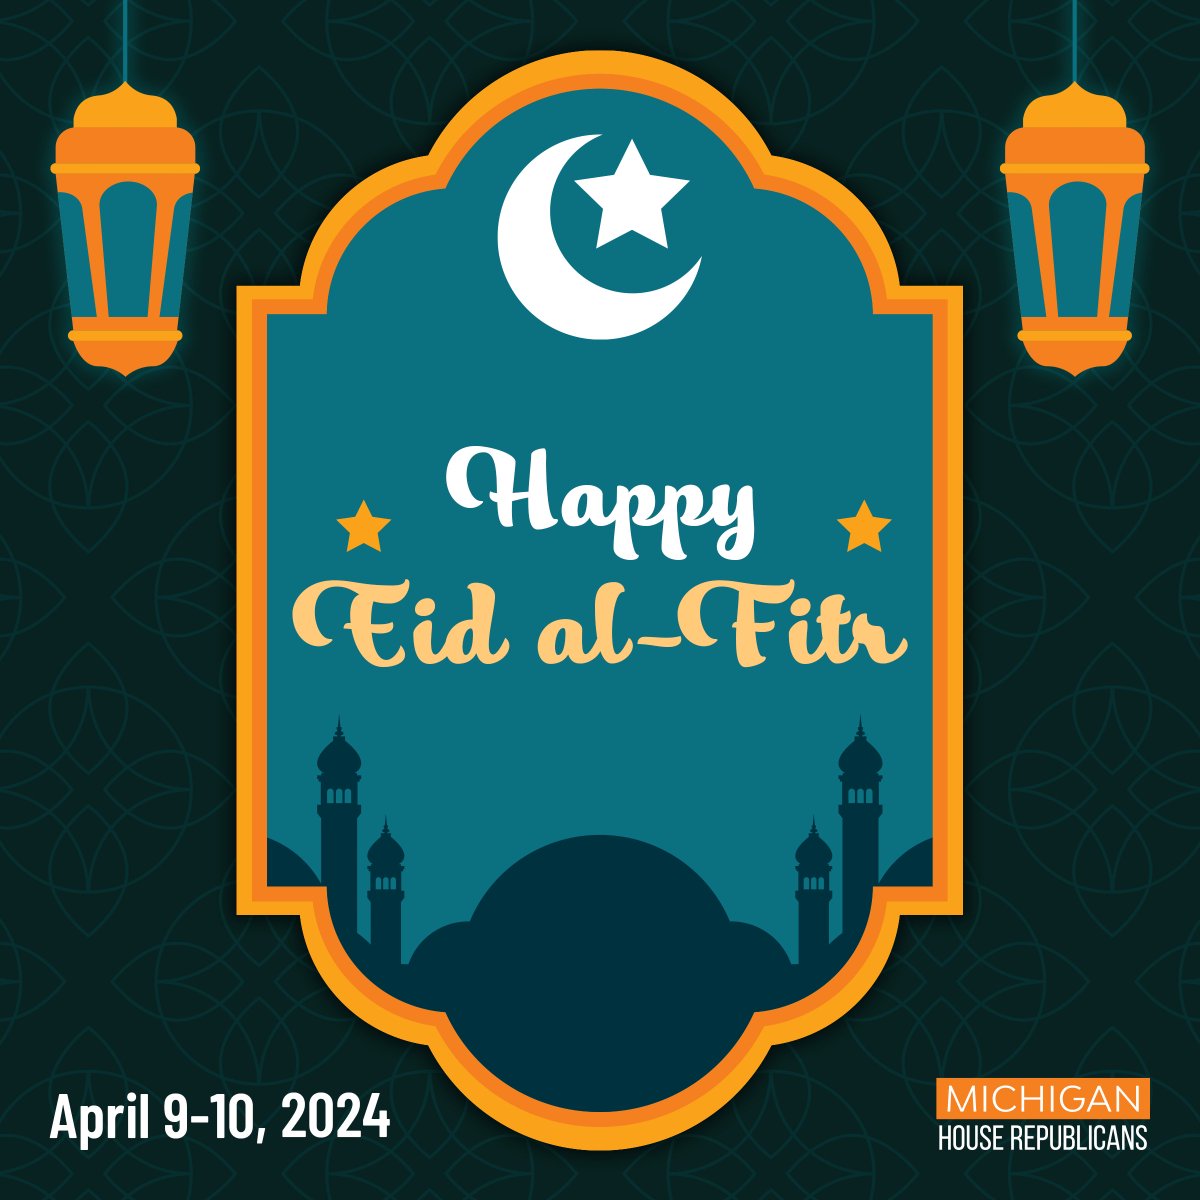 Today marks the conclusion of #Ramadan and the “breaking of the fast.” We wish those who celebrate a holy and festive #EidalFitr! ☪️